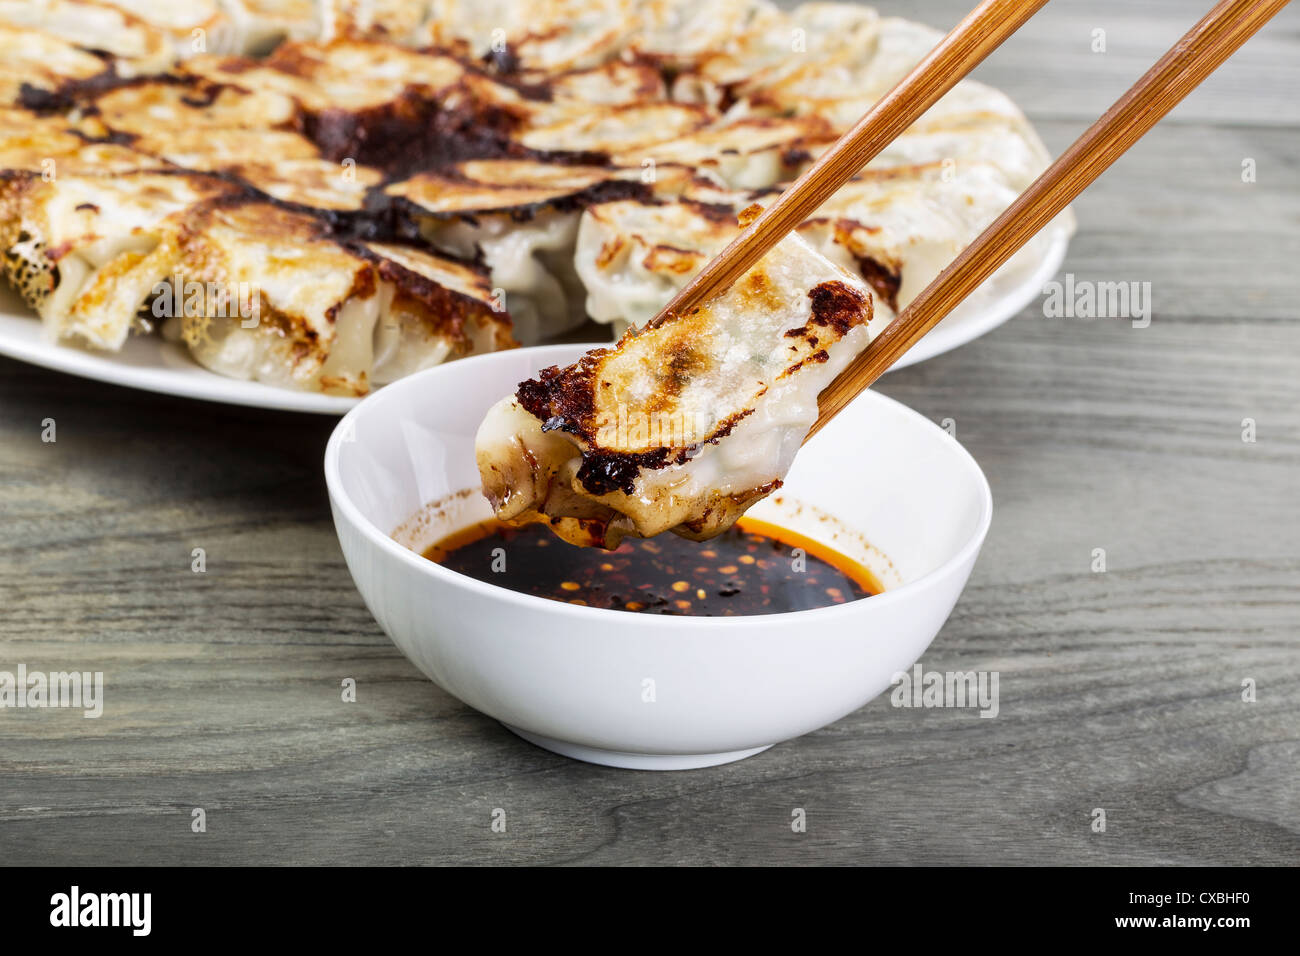 Freshly cooked Chinese dumplings with chopsticks, small white bowl and plate in background Stock Photo